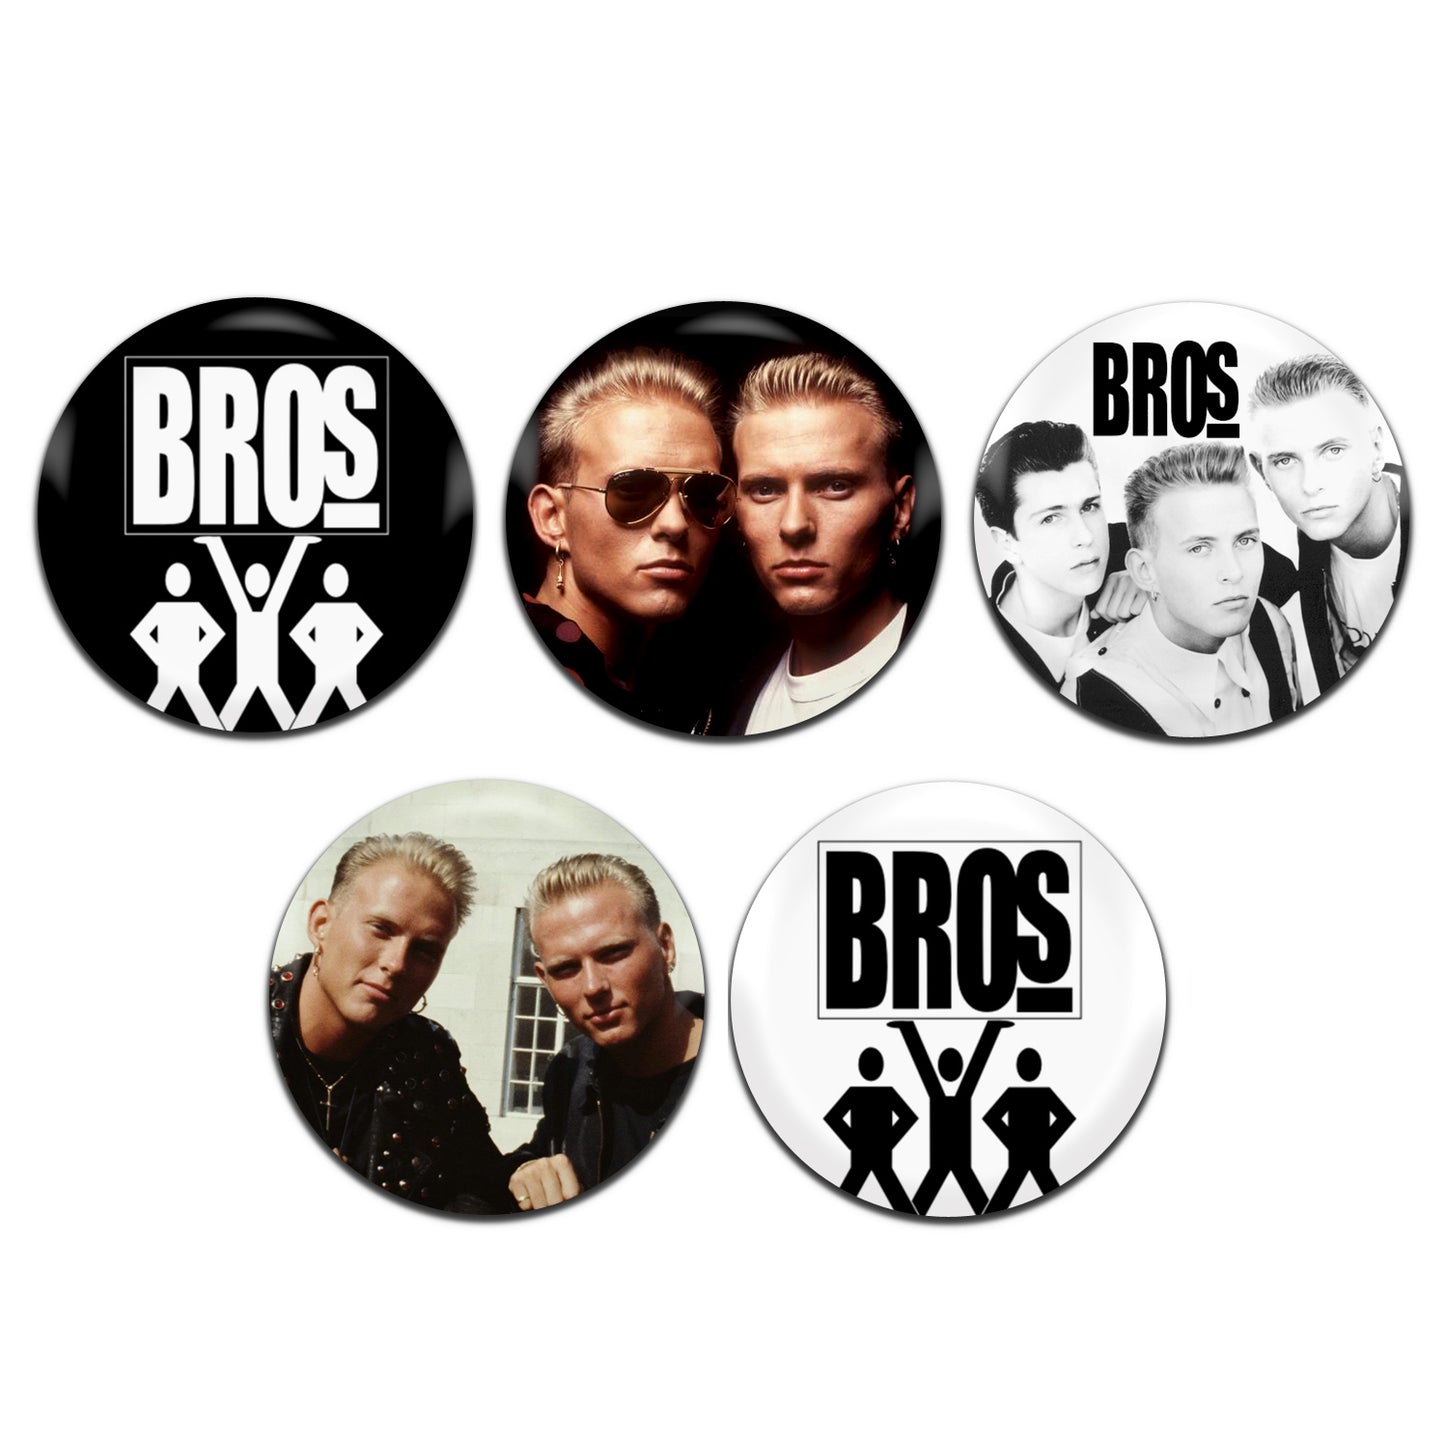 Bros 80's Pop Rock Band 25mm / 1 Inch D-Pin Button Badges (5x Set)